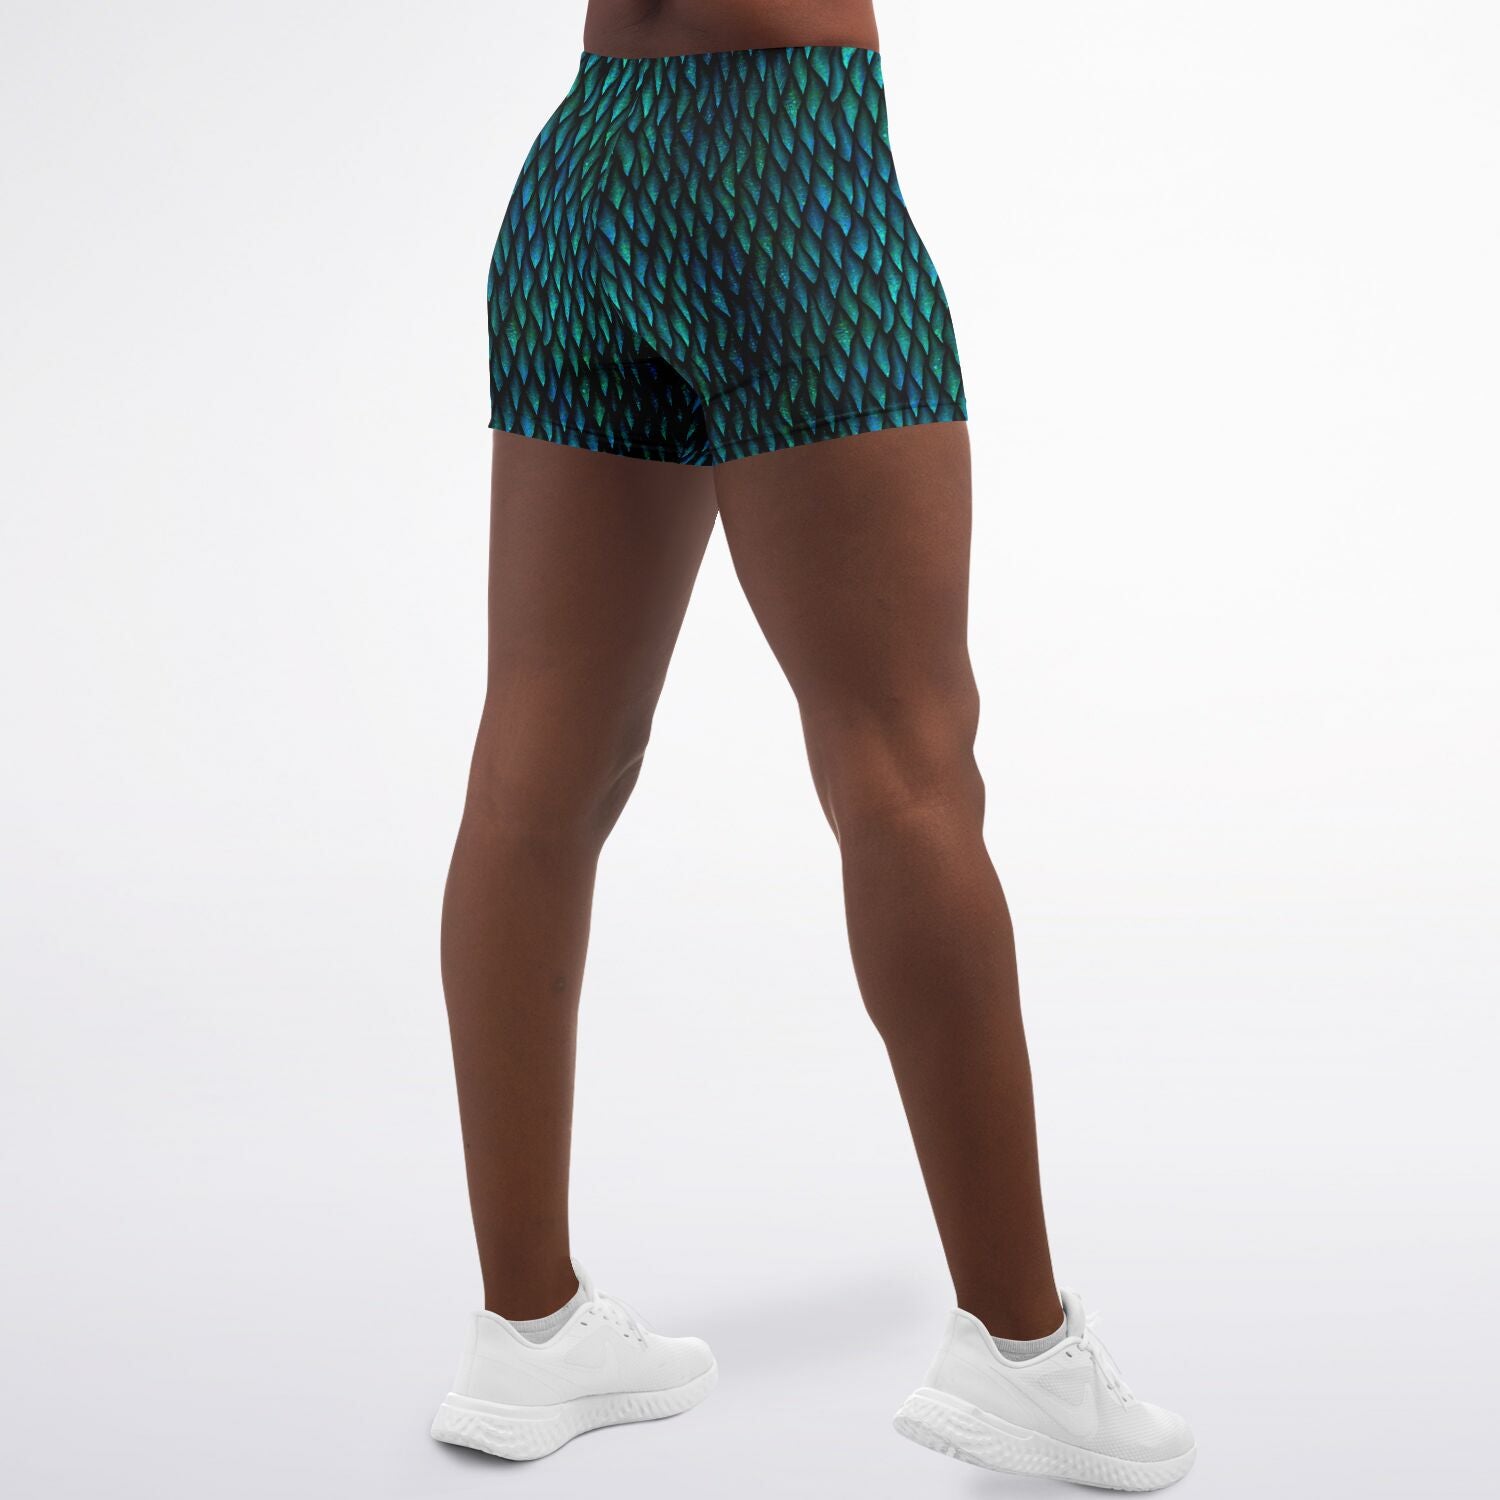 Women's Mid-rise Green Dragon Scales Athletic Booty Shorts